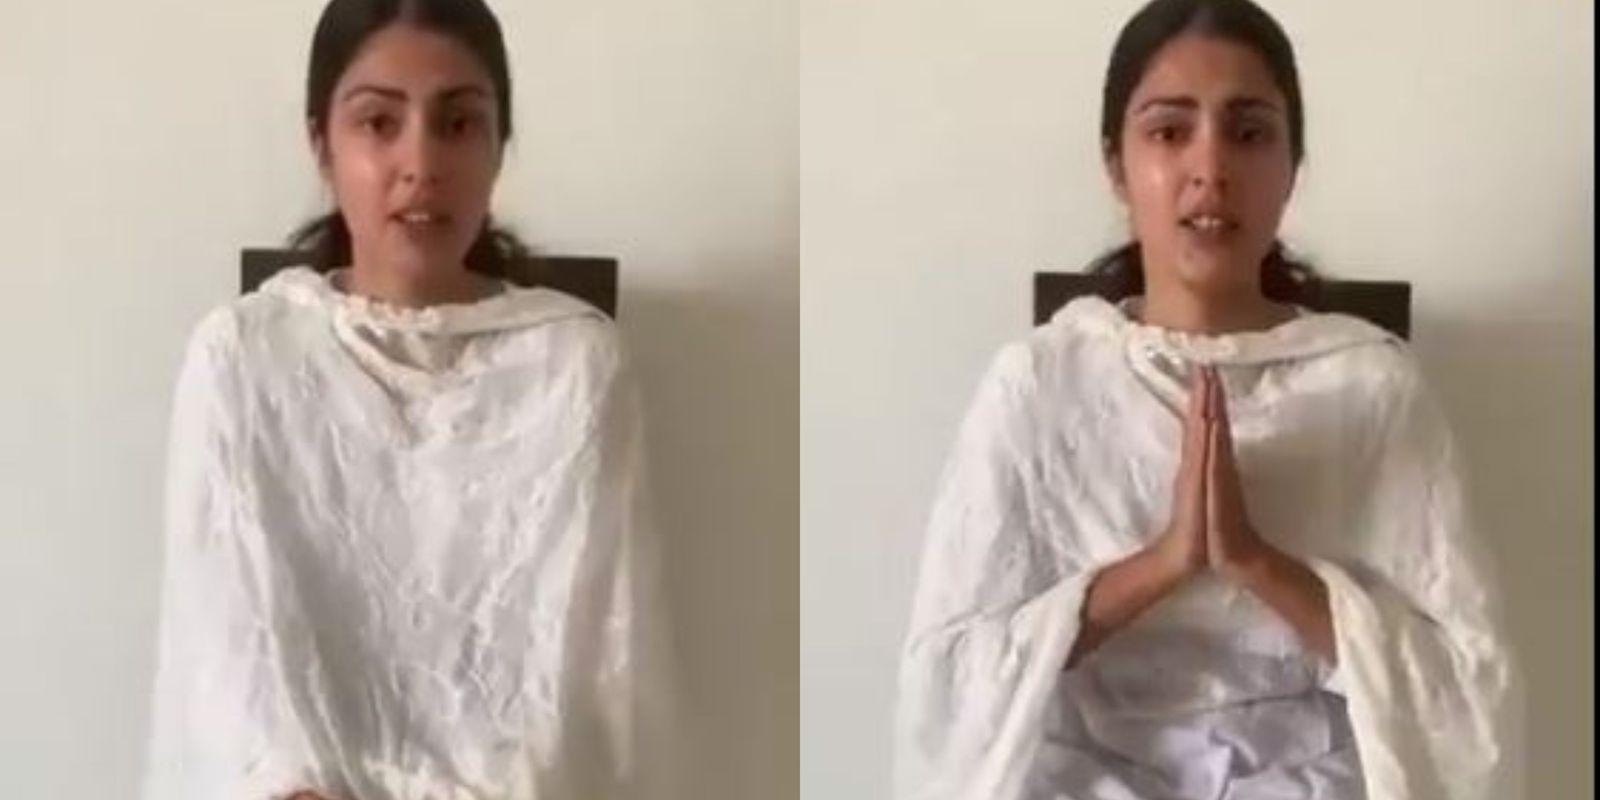 Rhea Chakraborty Says She'll Refrain From Commenting On The 'Horrible Things' Being Said About Her In Latest Video